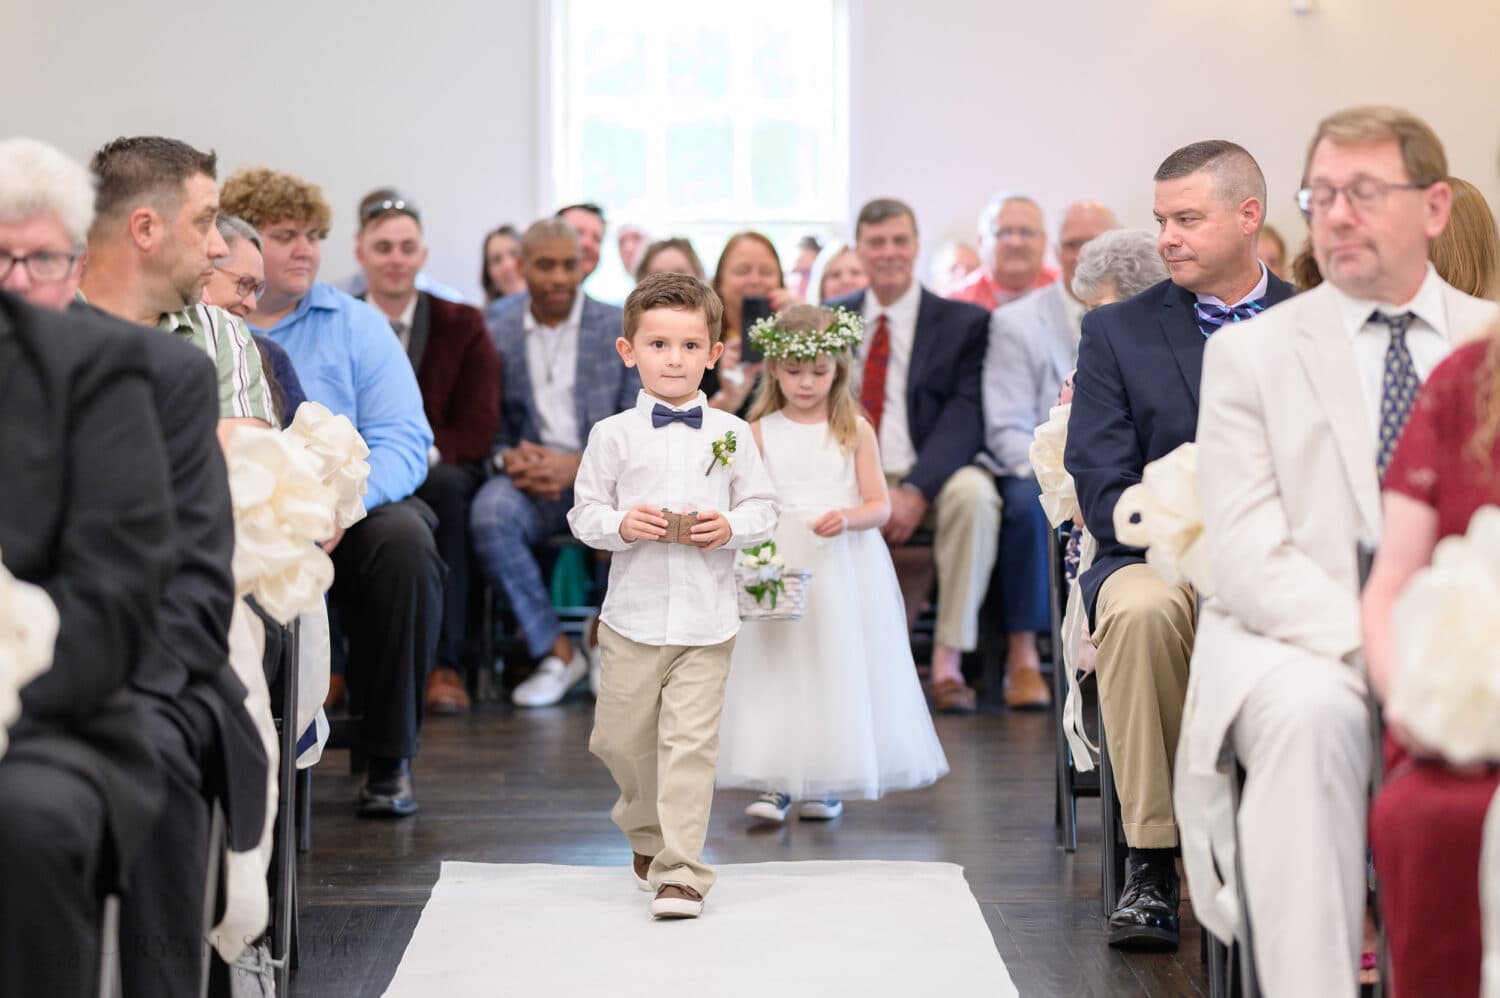 Ring bearer walking down the aisle - The Village House at Litchfield